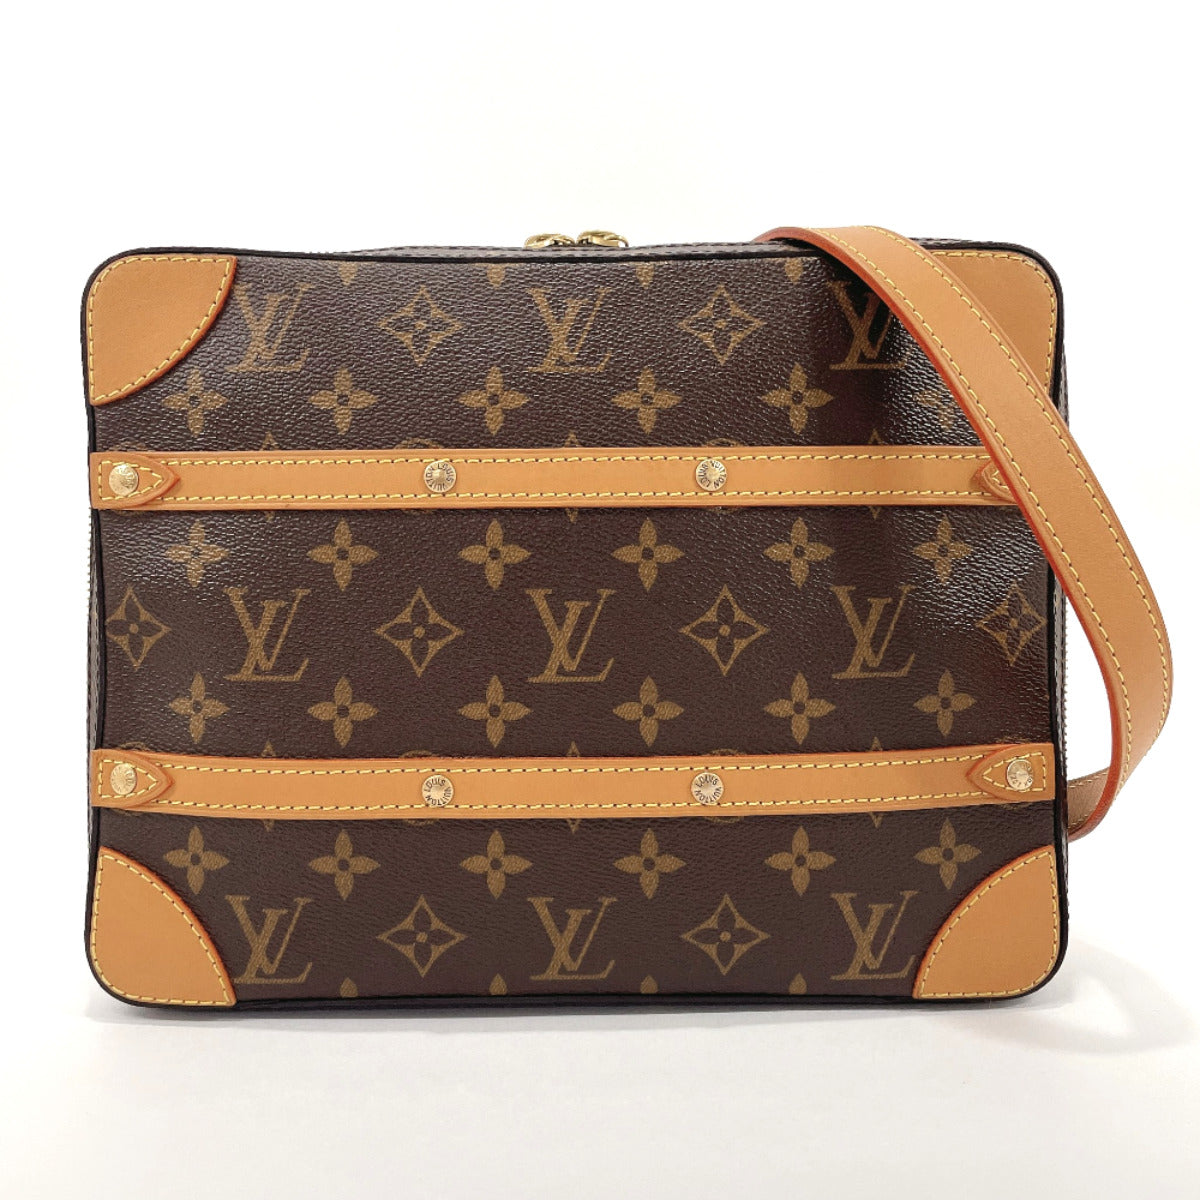 Louis Vuitton Soft Trunk Shoulder Bag in Brown Monogram Canvas And